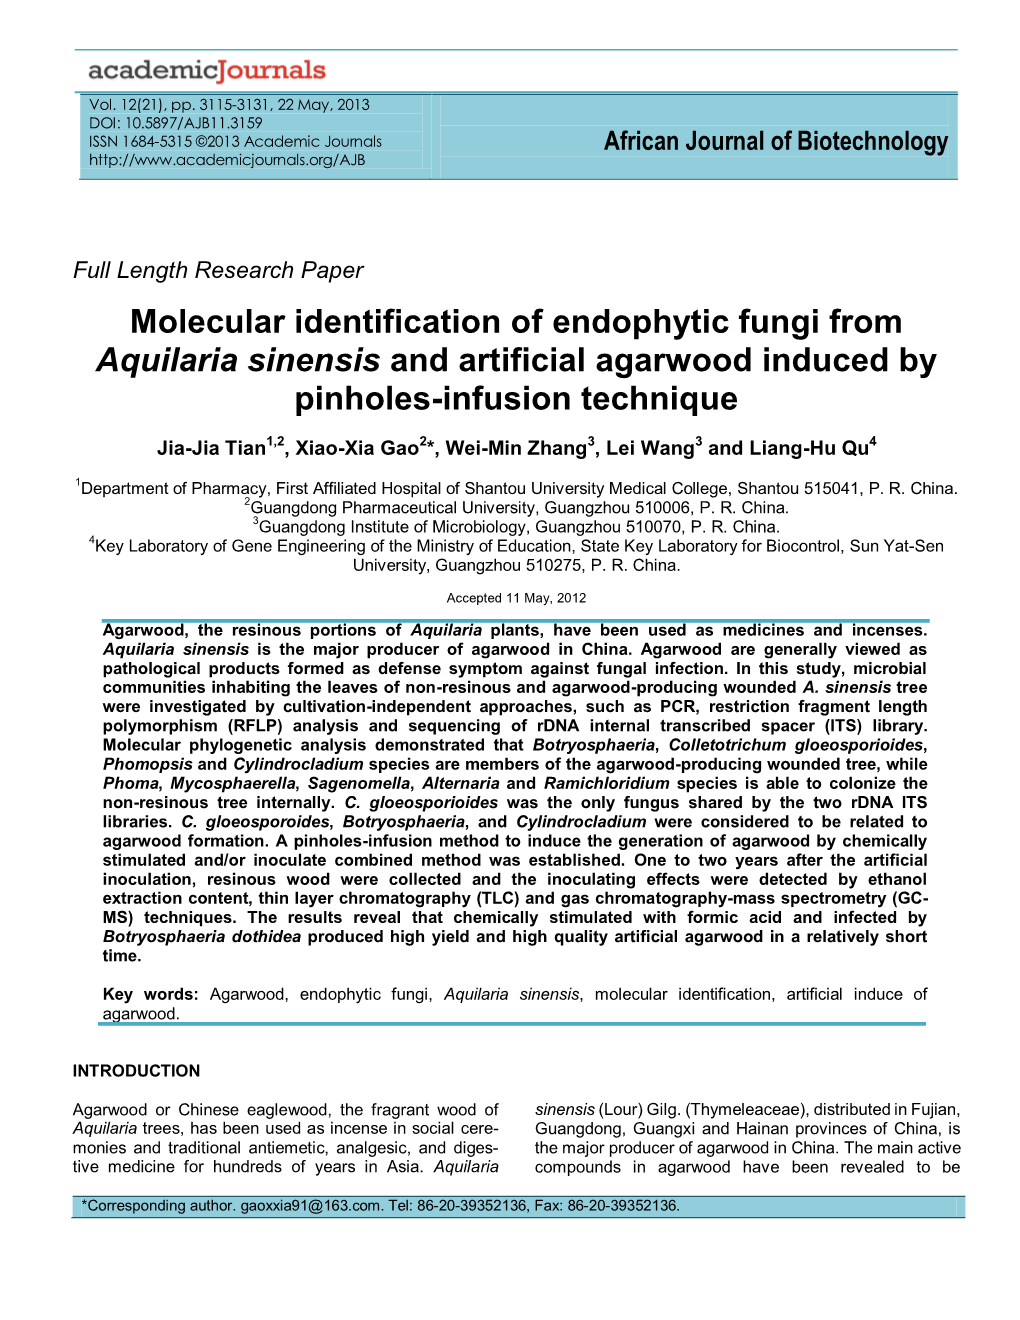 Molecular Identification of Endophytic Fungi from Aquilaria Sinensis and Artificial Agarwood Induced by Pinholes-Infusion Technique